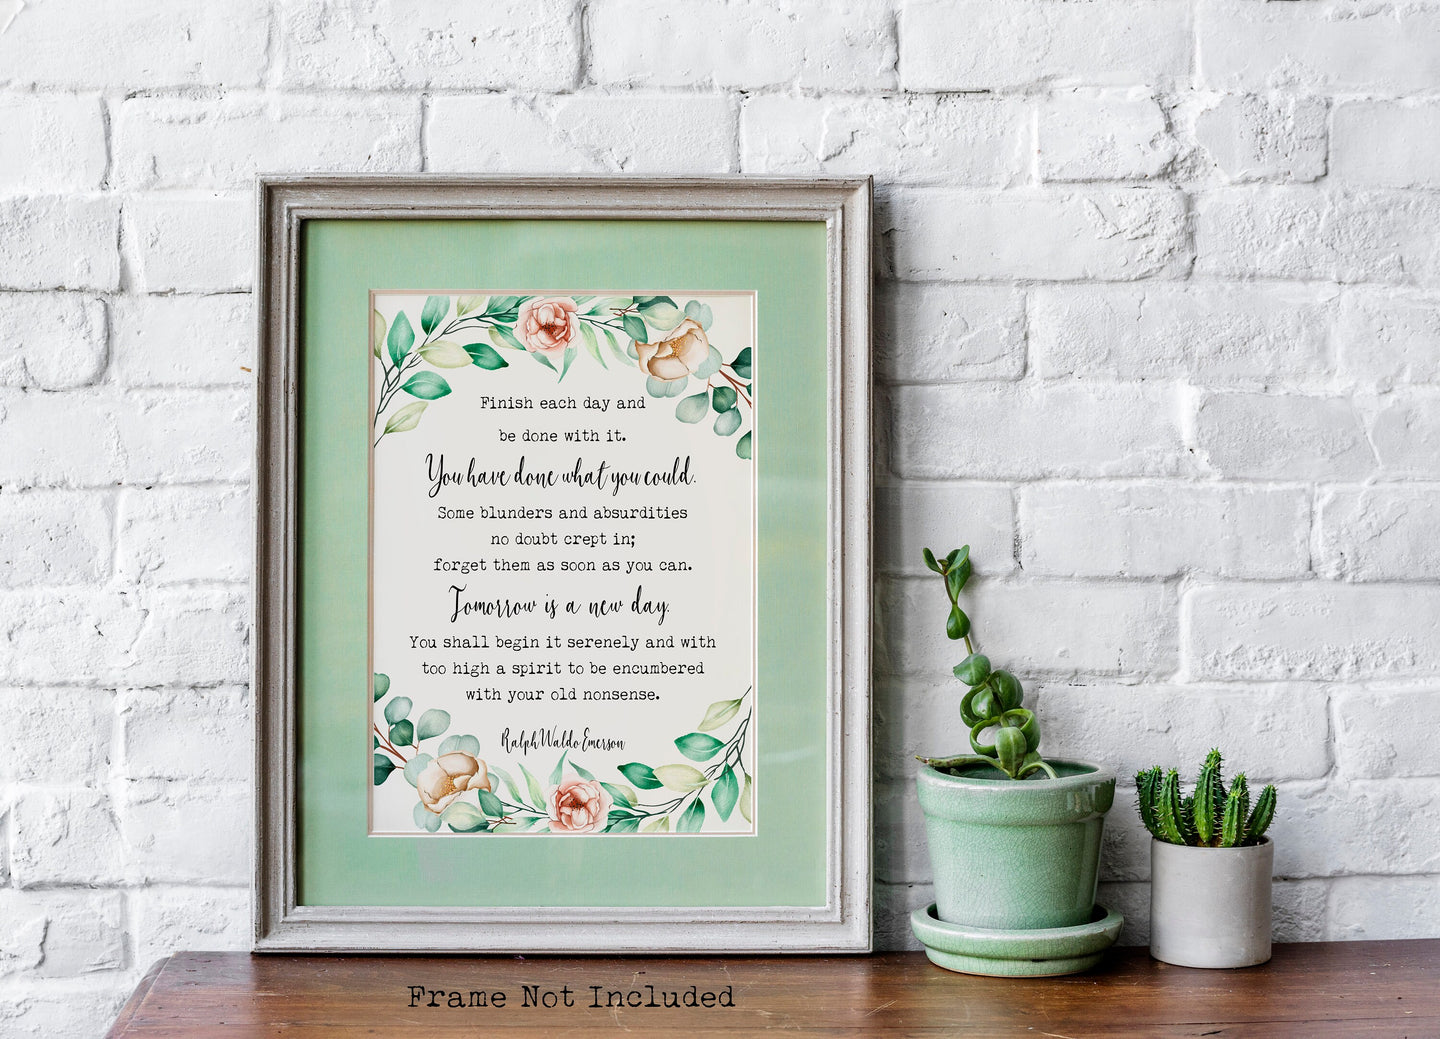 Emerson - Finish each day and be done with it - Ralph Waldo Emerson Quote - Tomorrow is a new day - Unframed print